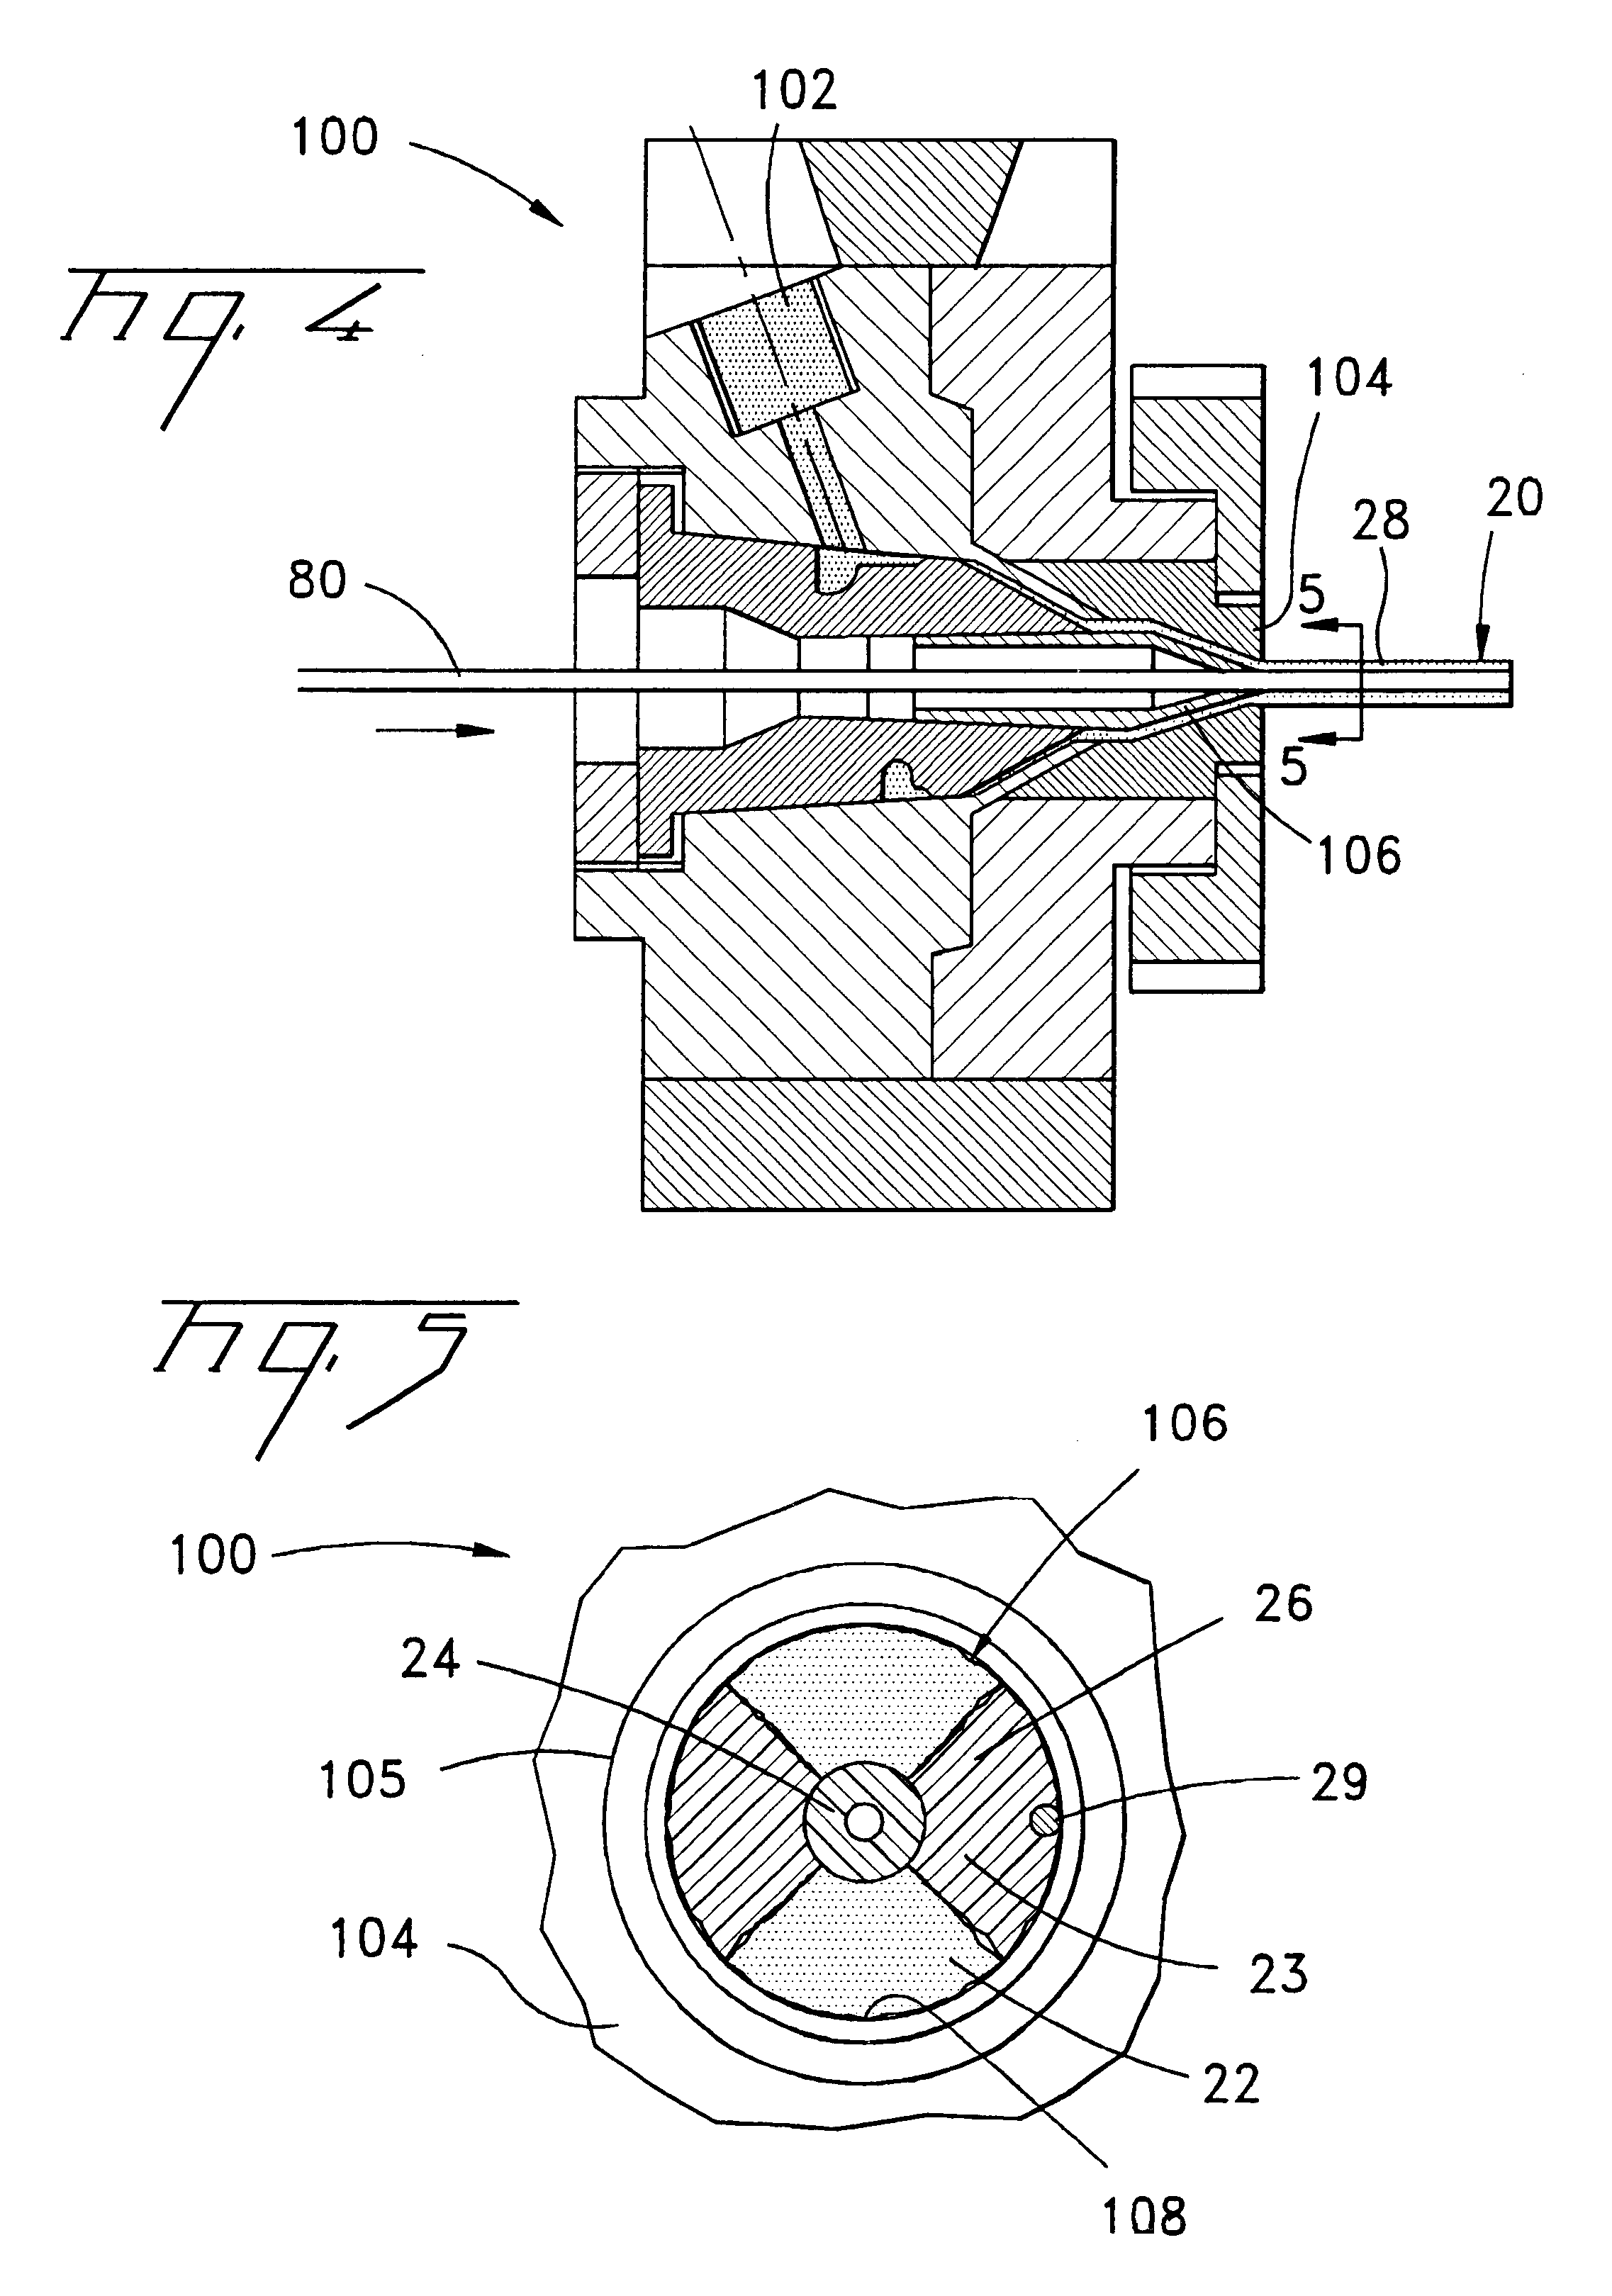 Fiber optic cables having ultra-low shrinking filaments and methods of making the same